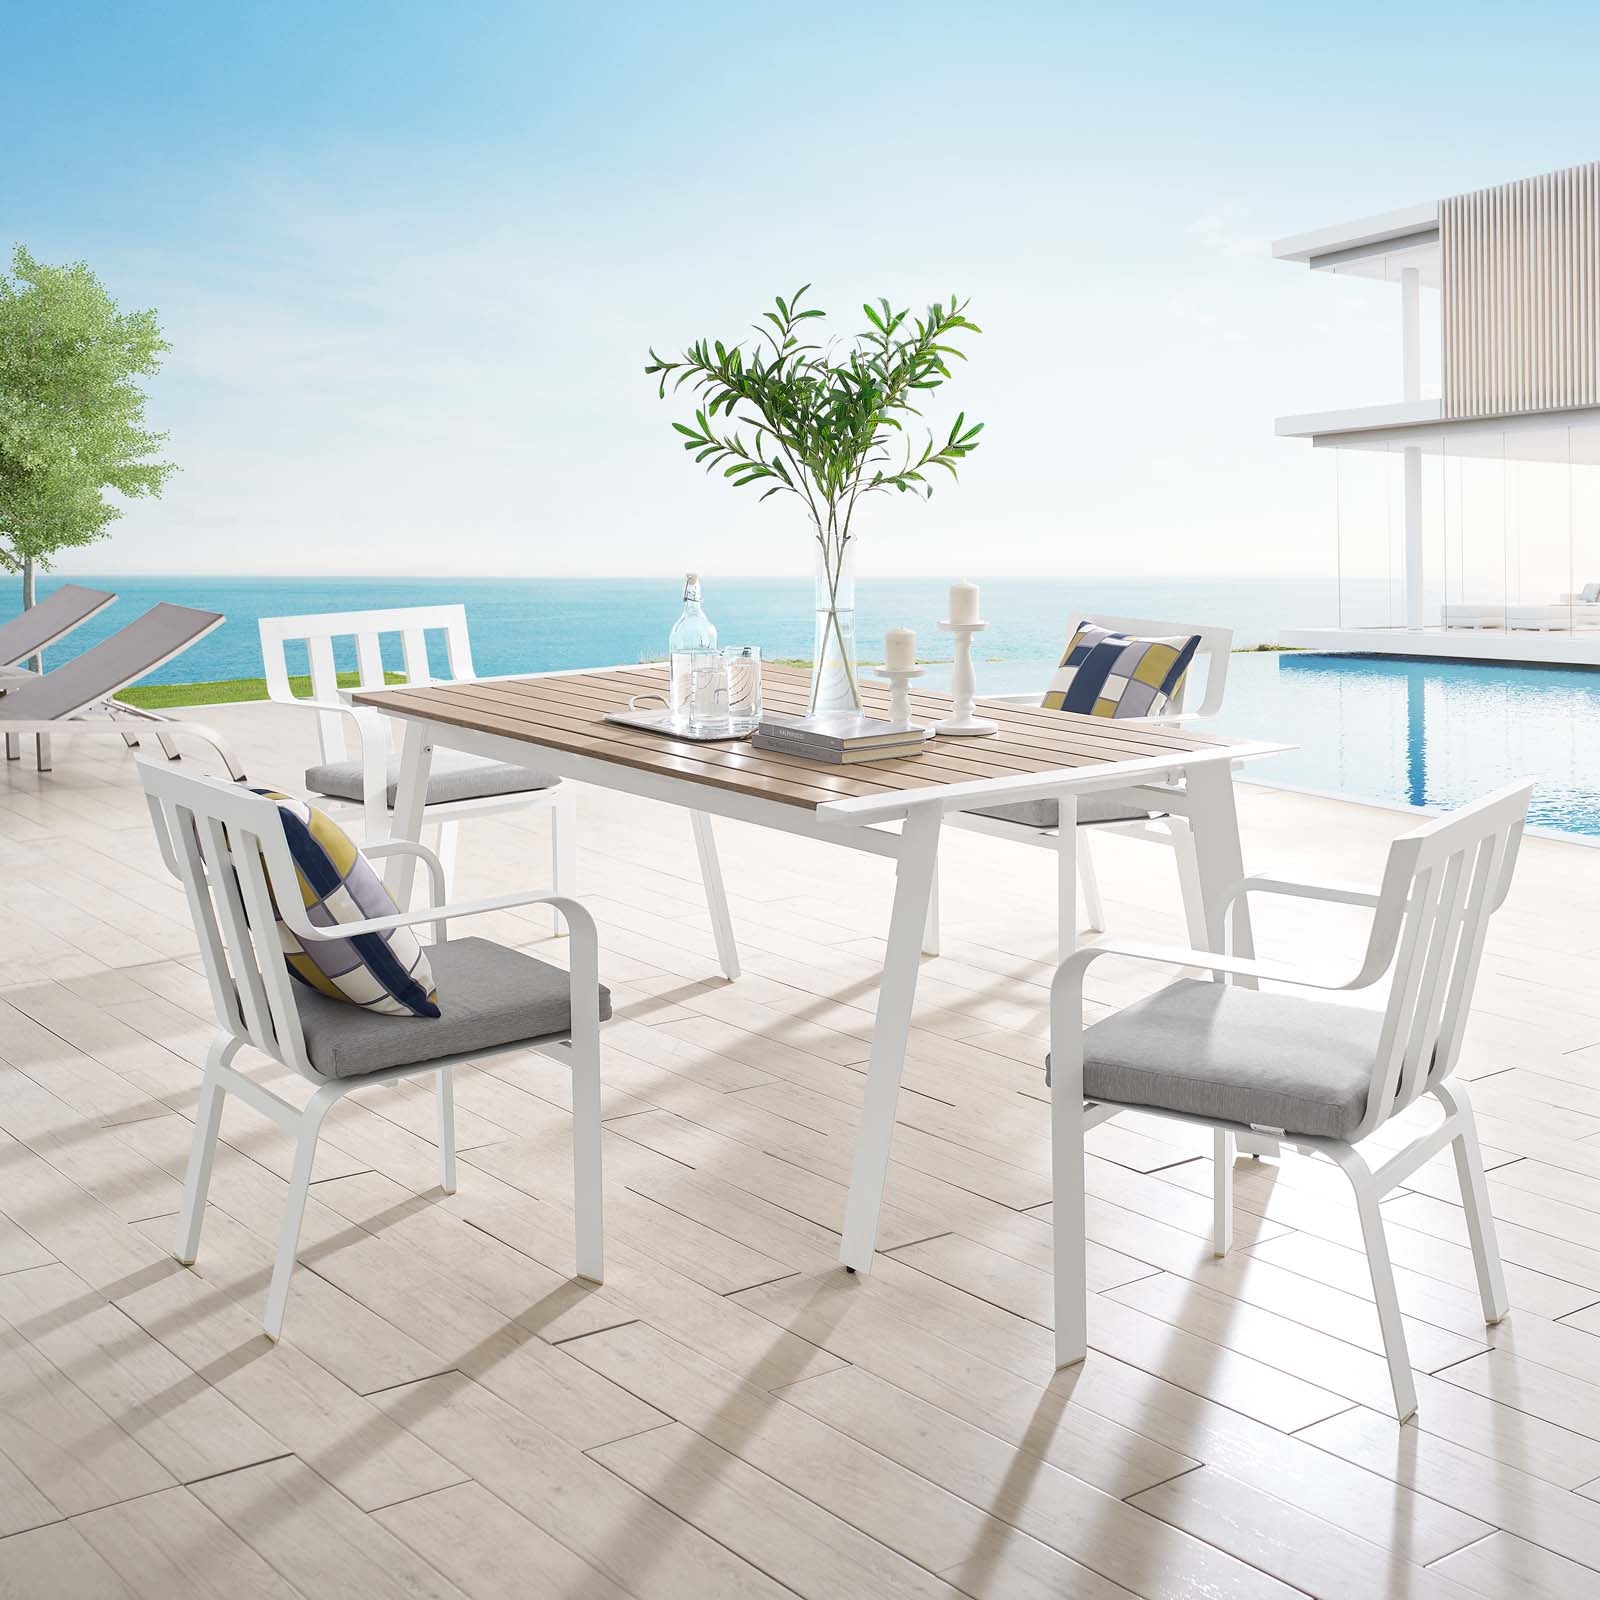 Baxley 5 Piece Outdoor Patio Aluminum Dining Set - East Shore Modern Home Furnishings